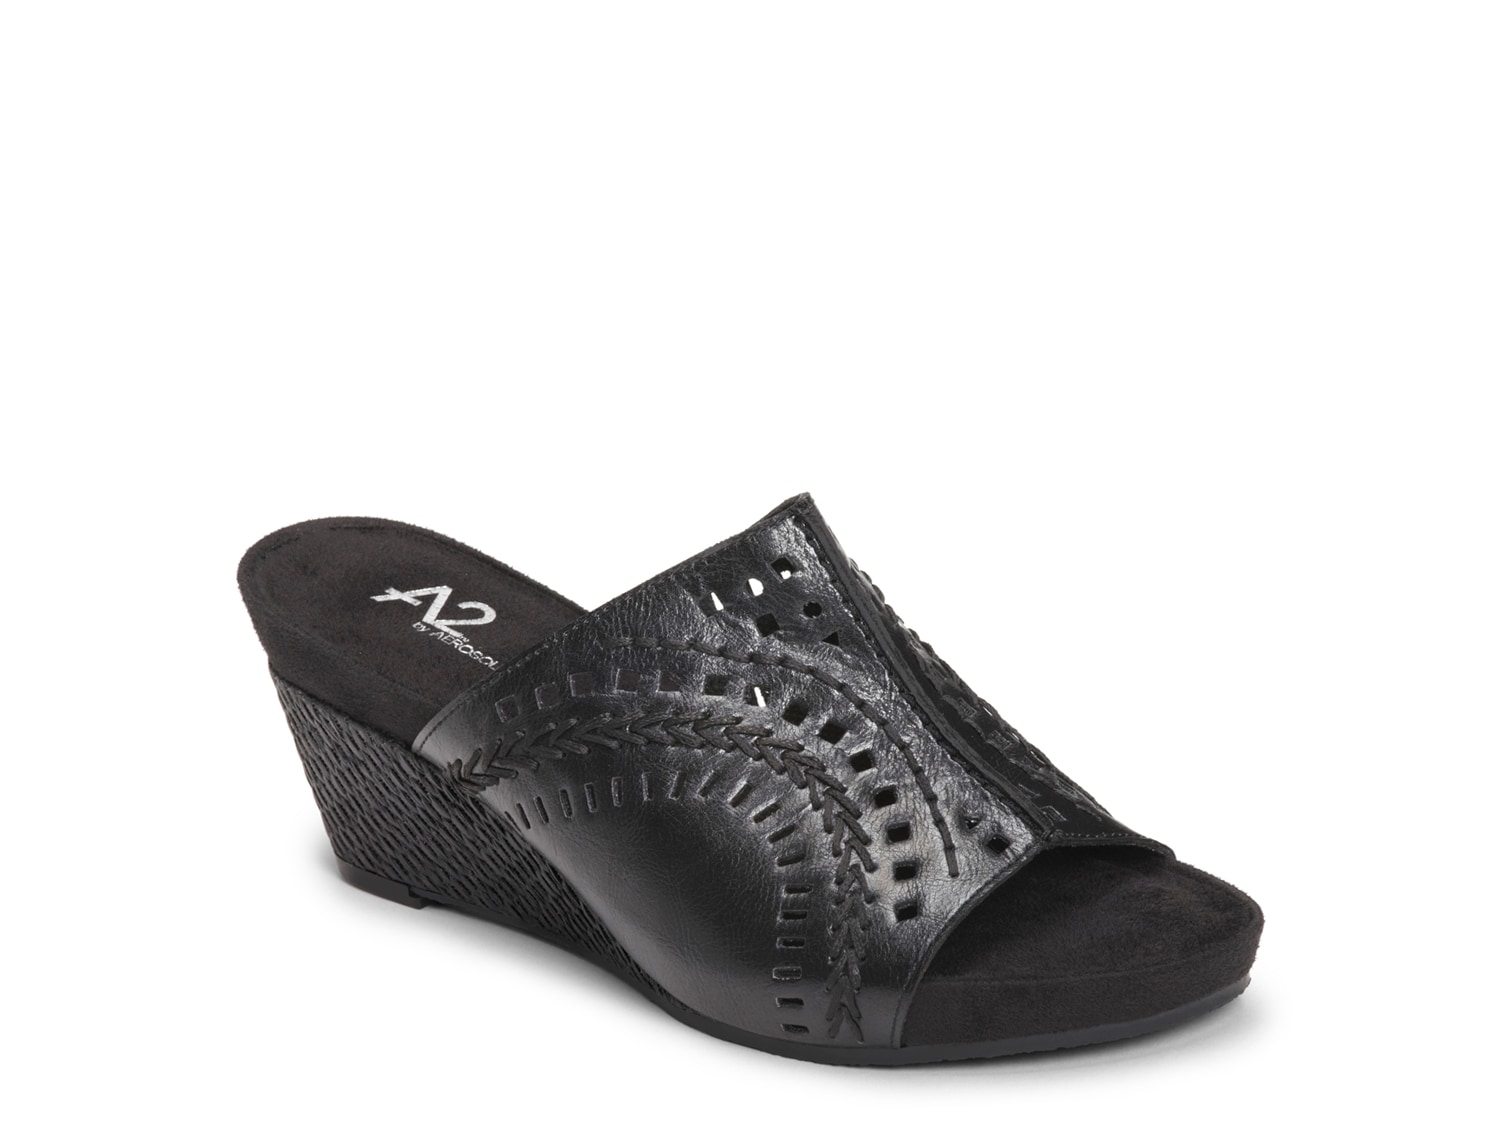 A2 by Aerosoles Highlight Wedge Sandal - Free Shipping | DSW